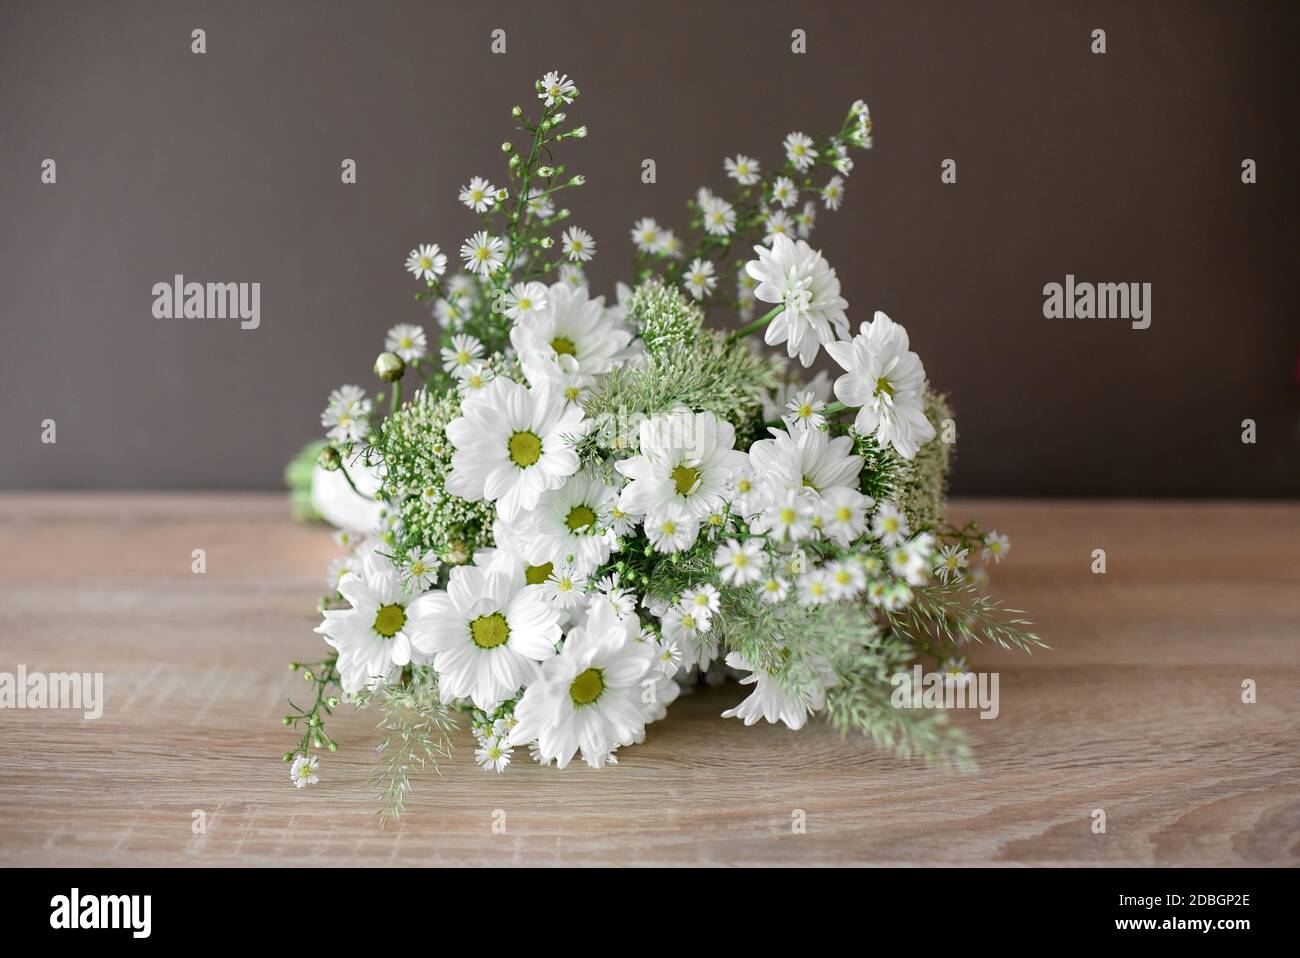 Dainty bridal bouquet with fresh white spring daisies lying on a wooden table in close up Stock Photo